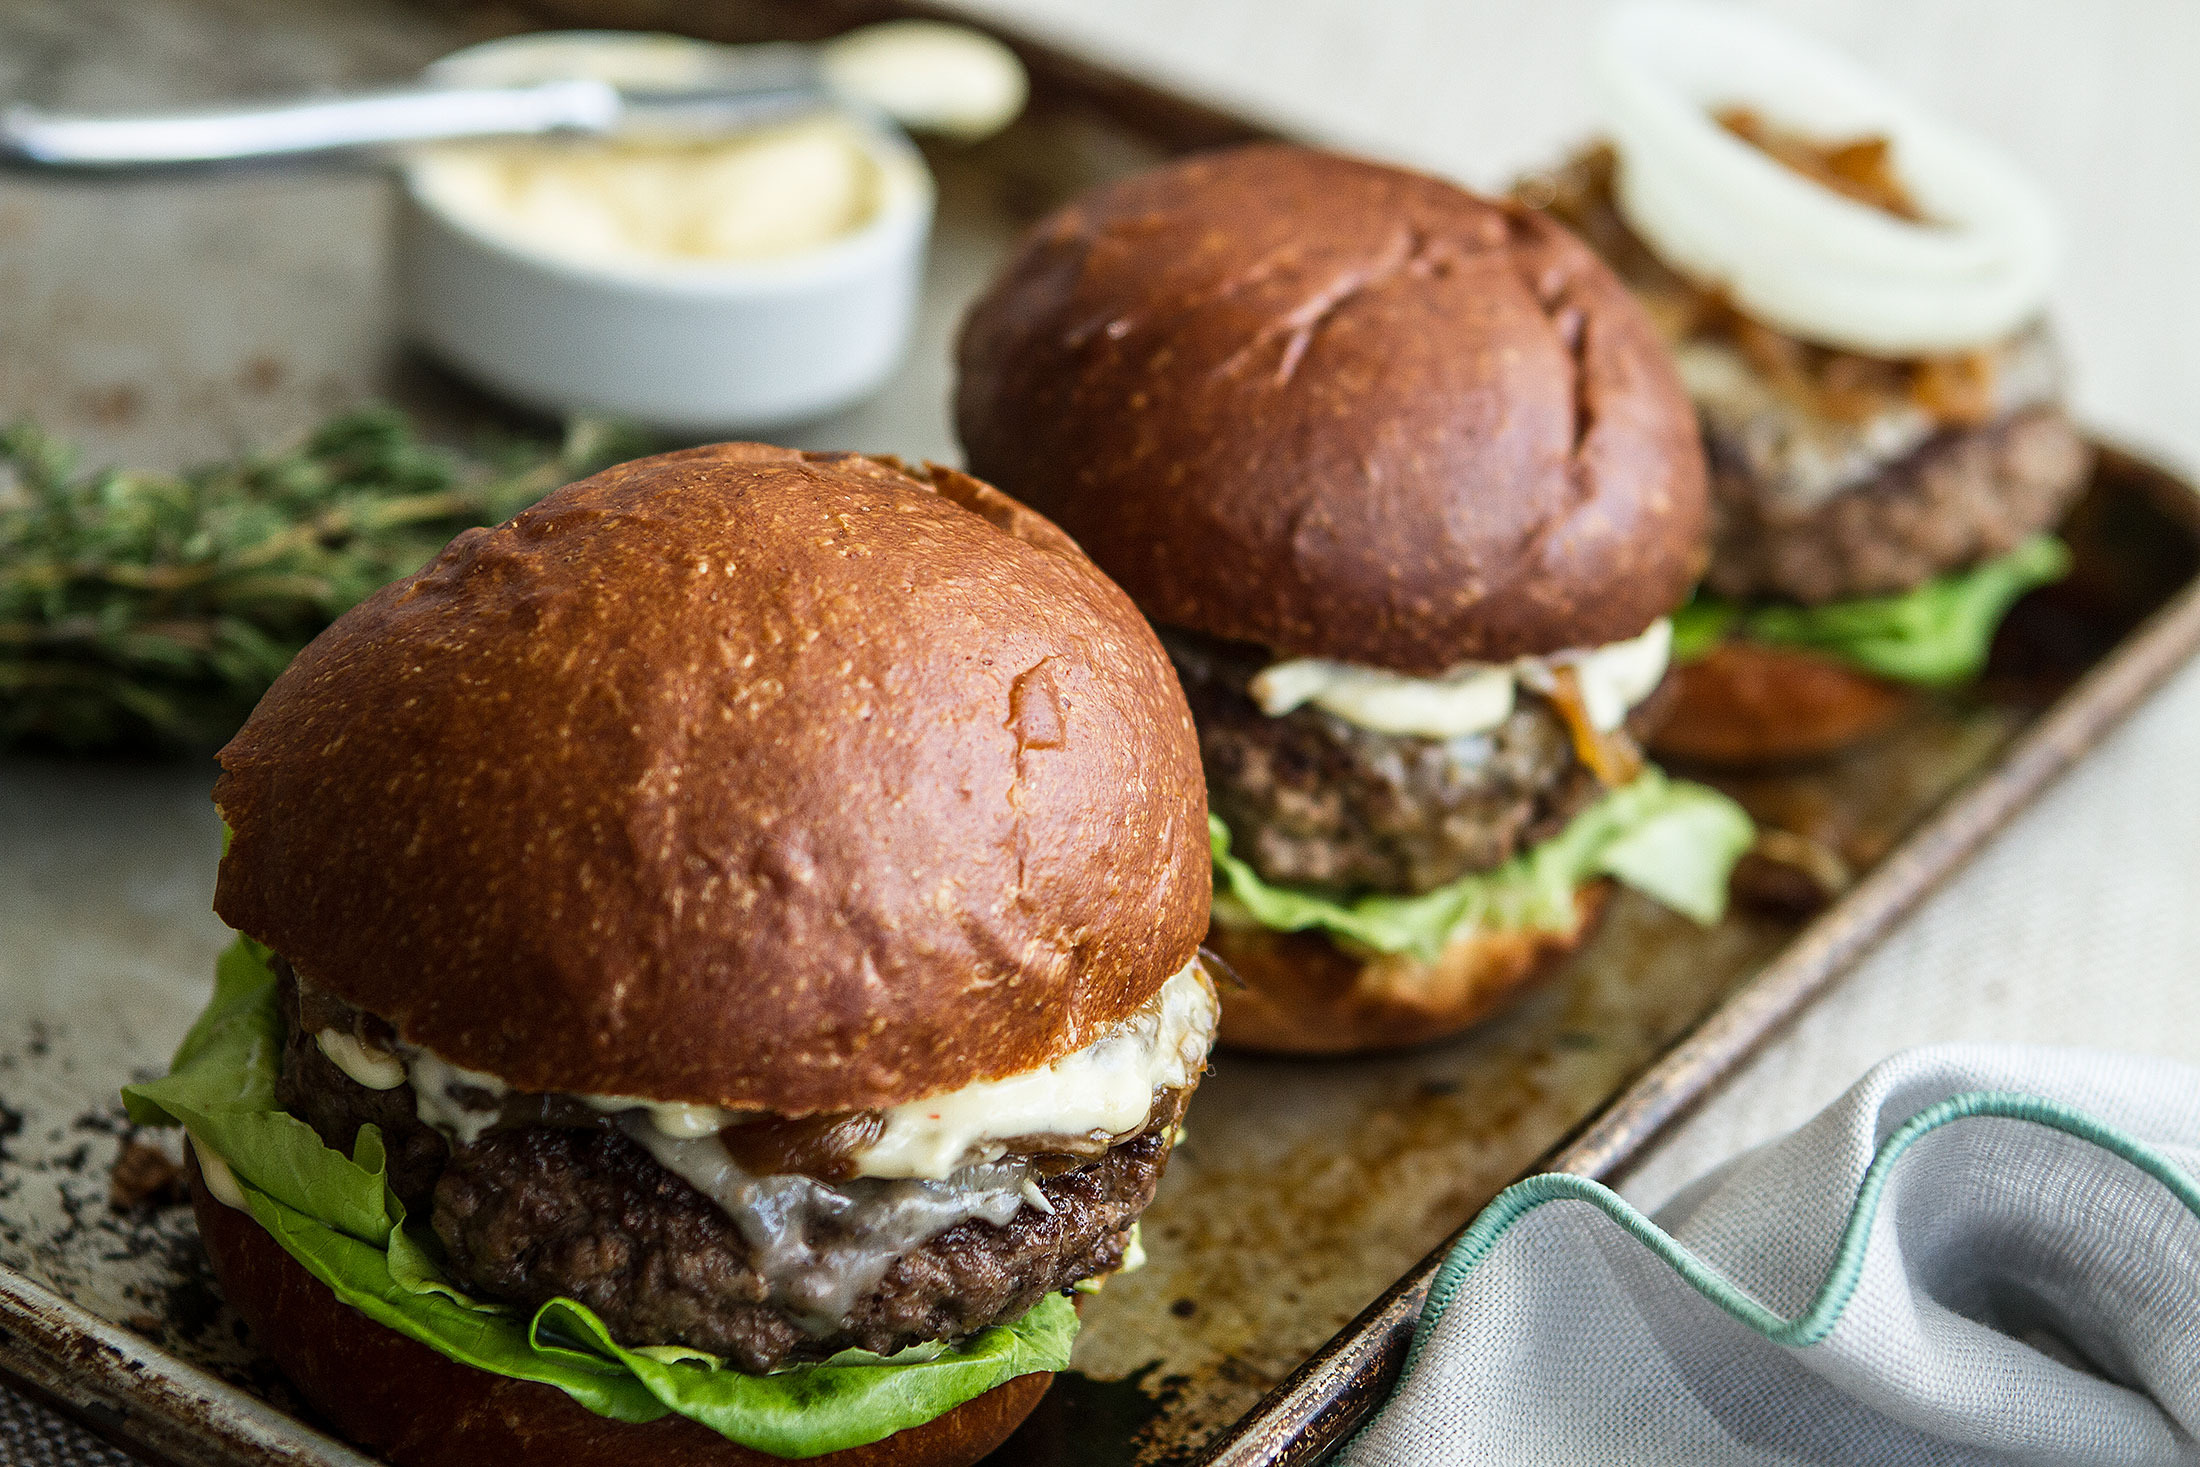  Two Easy (but Crucial) Steps for Making the Best Burgers at Home  June 2015  BLOOMBERG.COM 